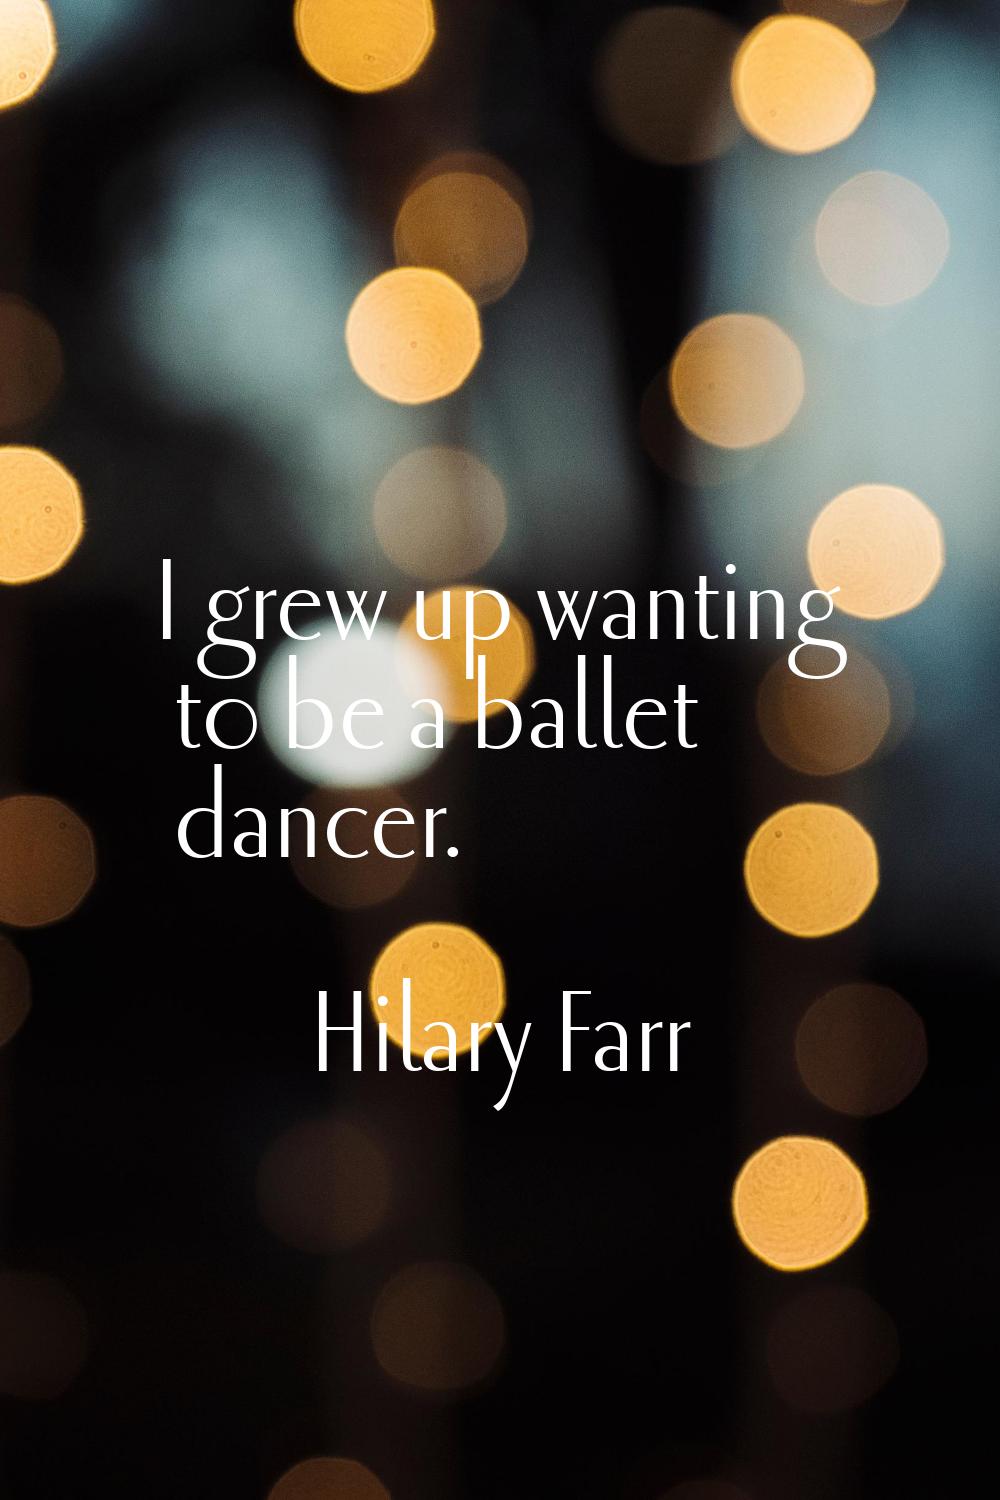 I grew up wanting to be a ballet dancer.